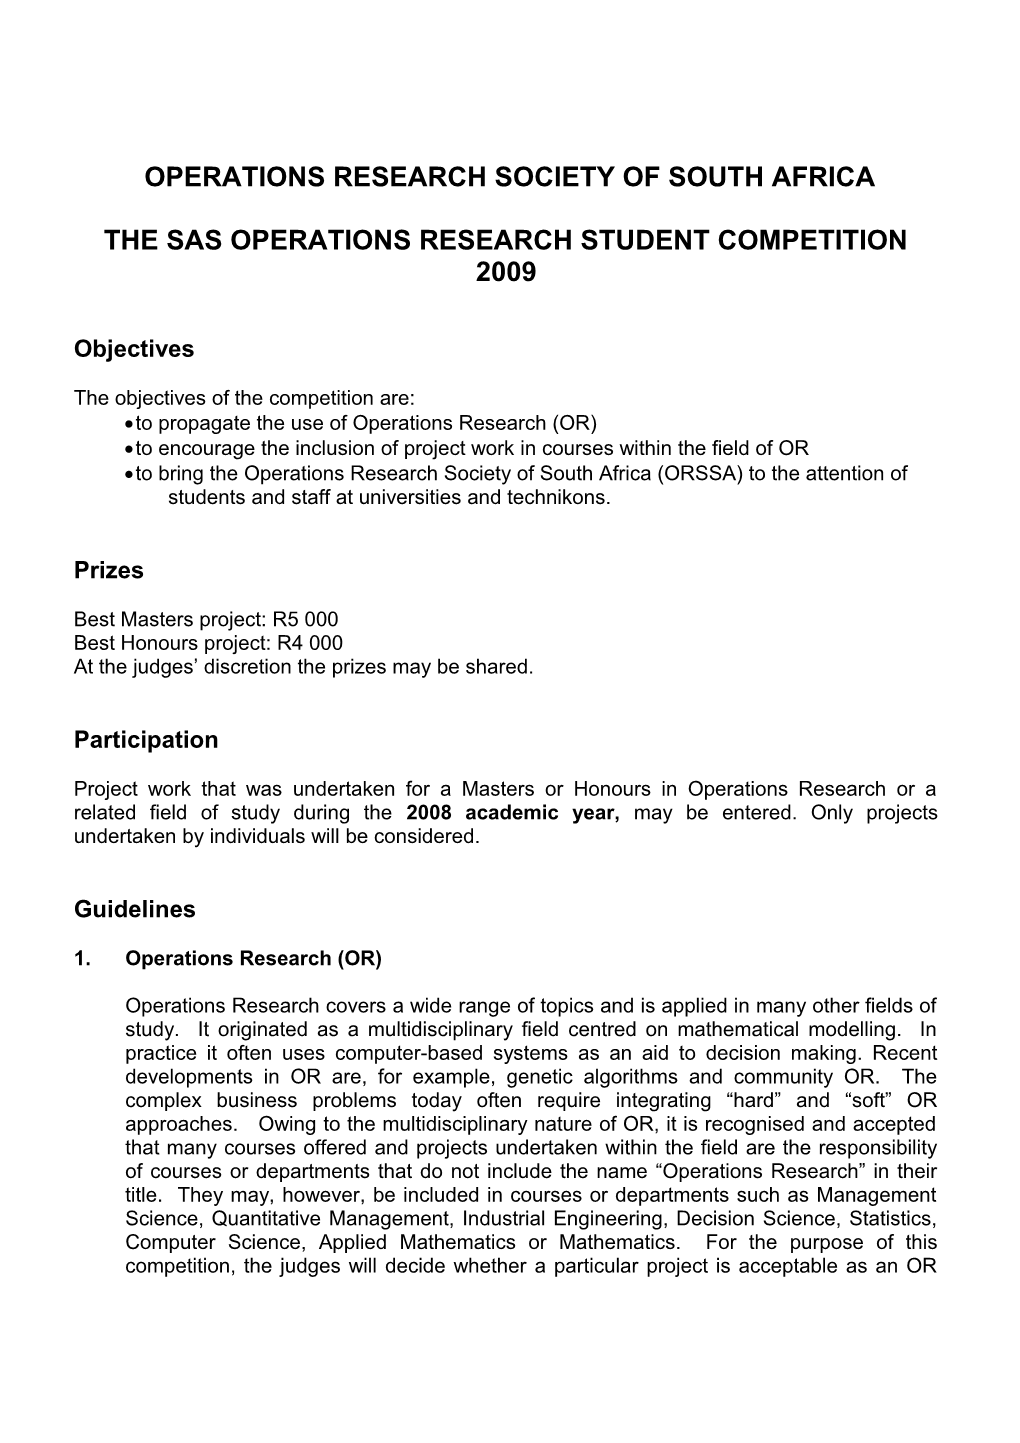 Operations Research Society of South Africa